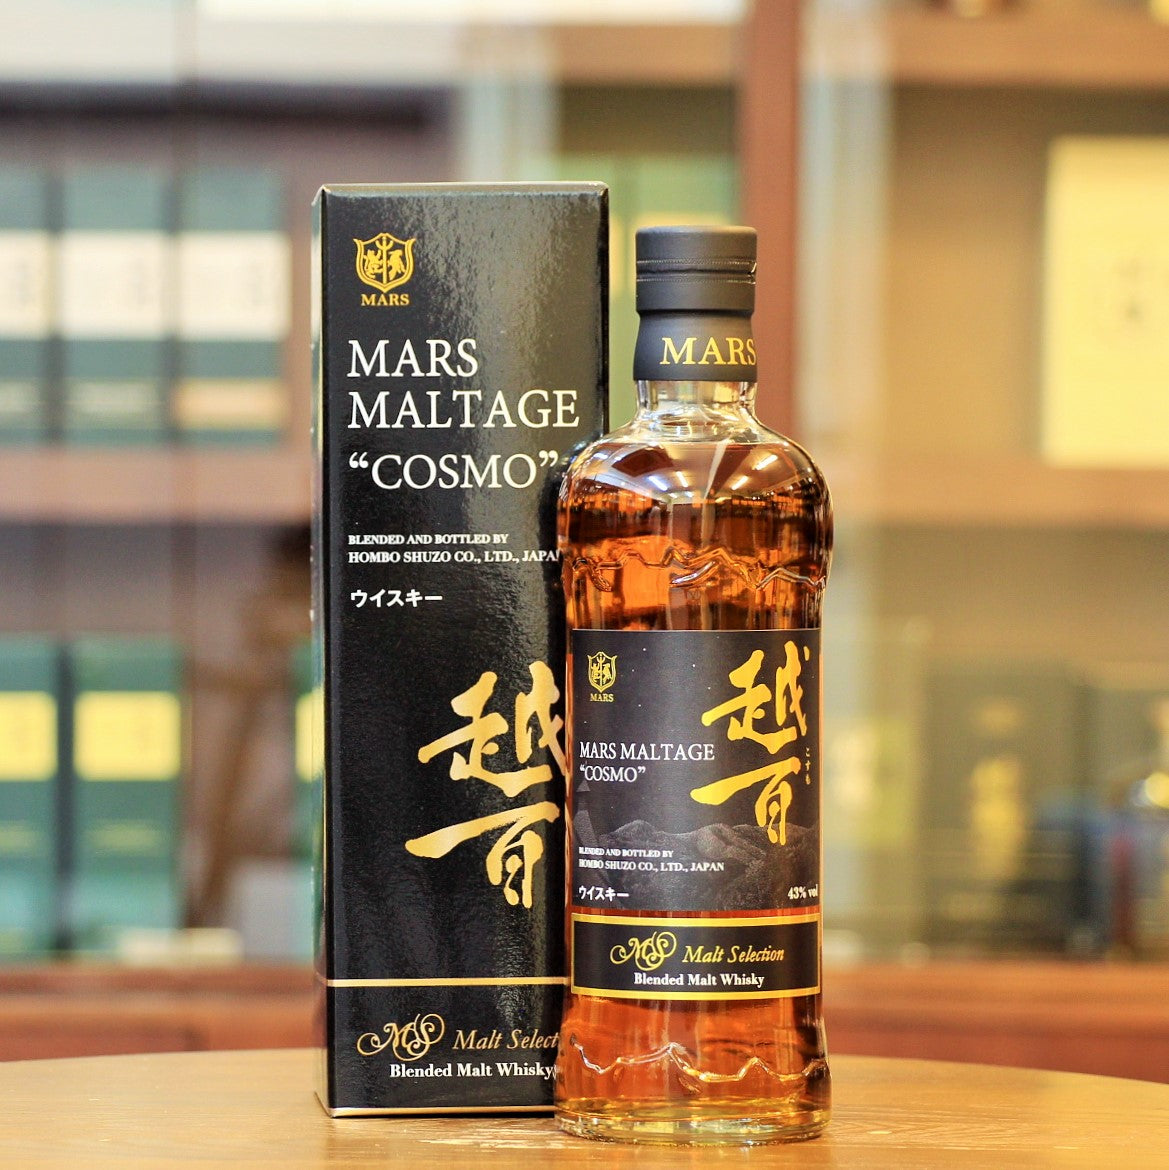 Mars Maltage blended malt whisky from japan. Mizunara The Shop has an extensive list of whiskies and spirits.